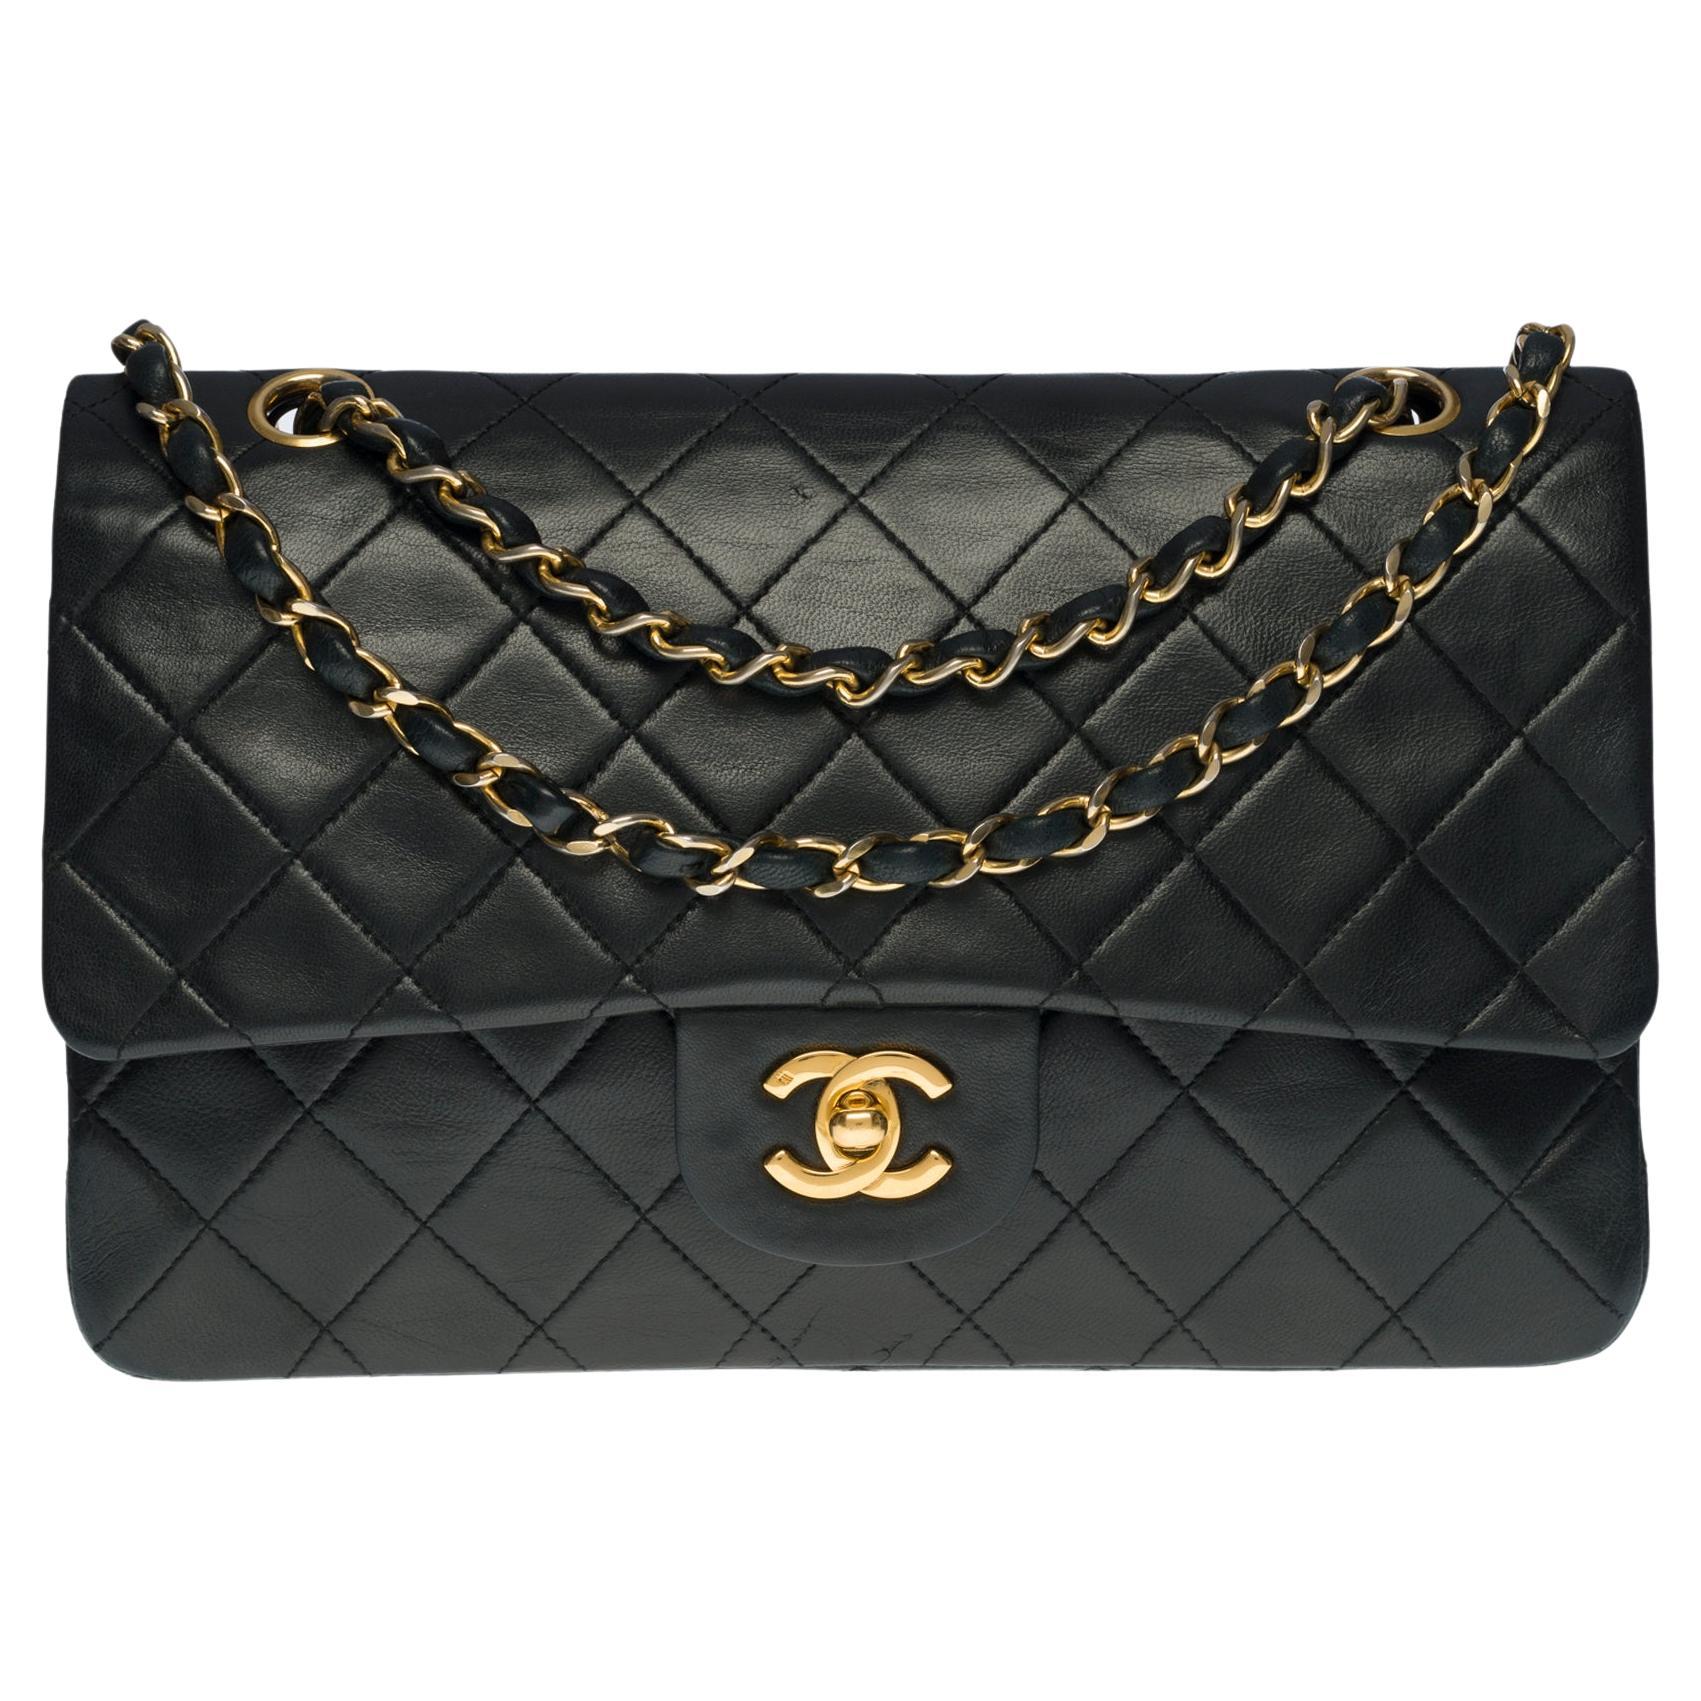 Chanel Timeless medium double flap shoulder bag in black quilted lambskin, GHW For Sale